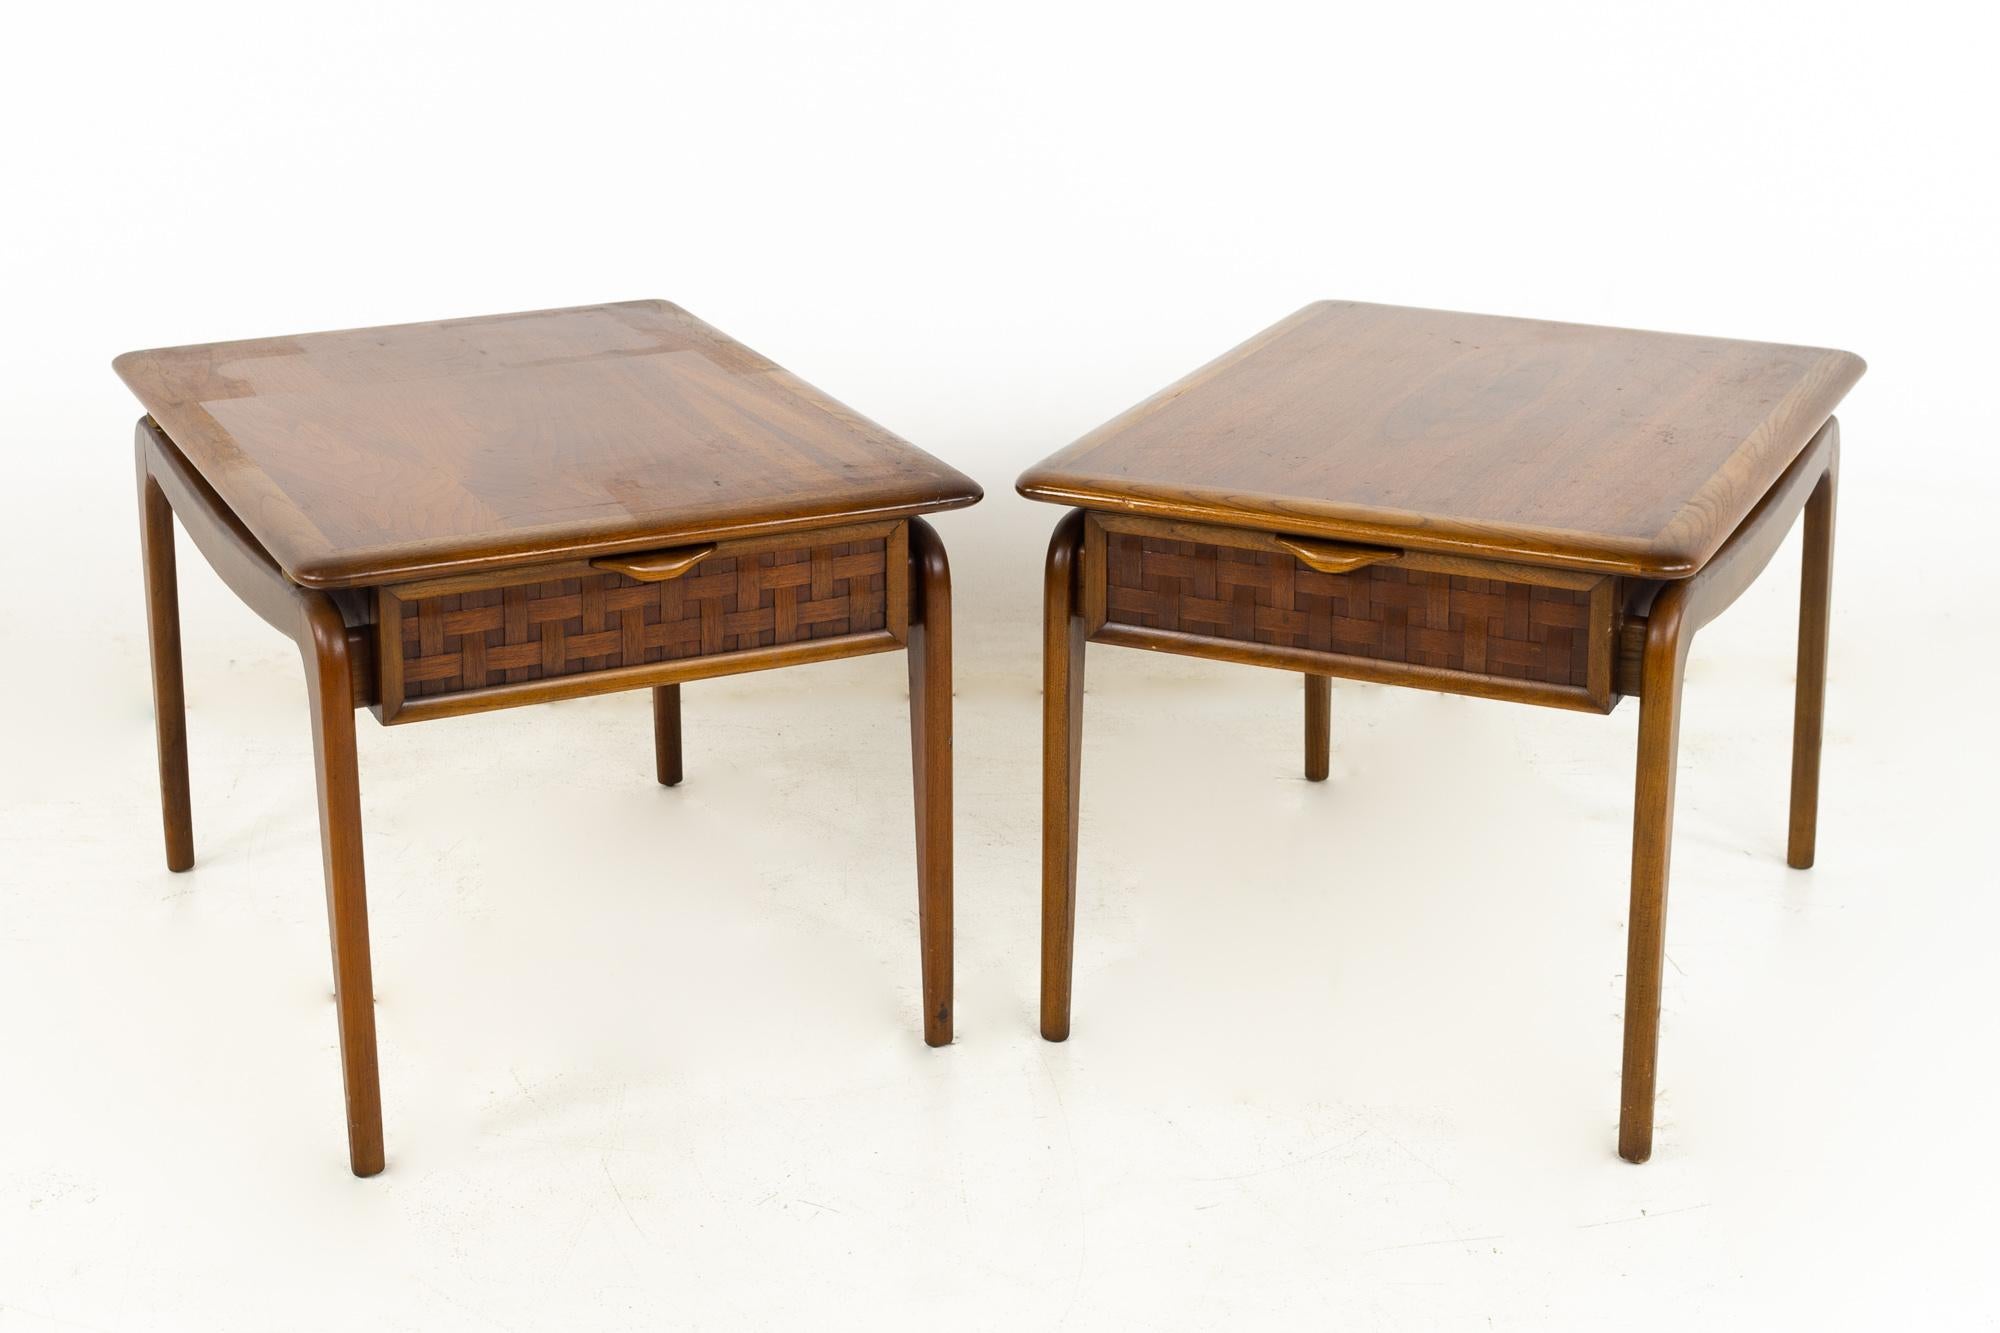 Andre Bus For Lane Perception mid century walnut side end tables- a pair

These tables measure: 22 wide x 30 deep x 19.5 inches high

?All pieces of furniture can be had in what we call restored vintage condition. That means the piece is